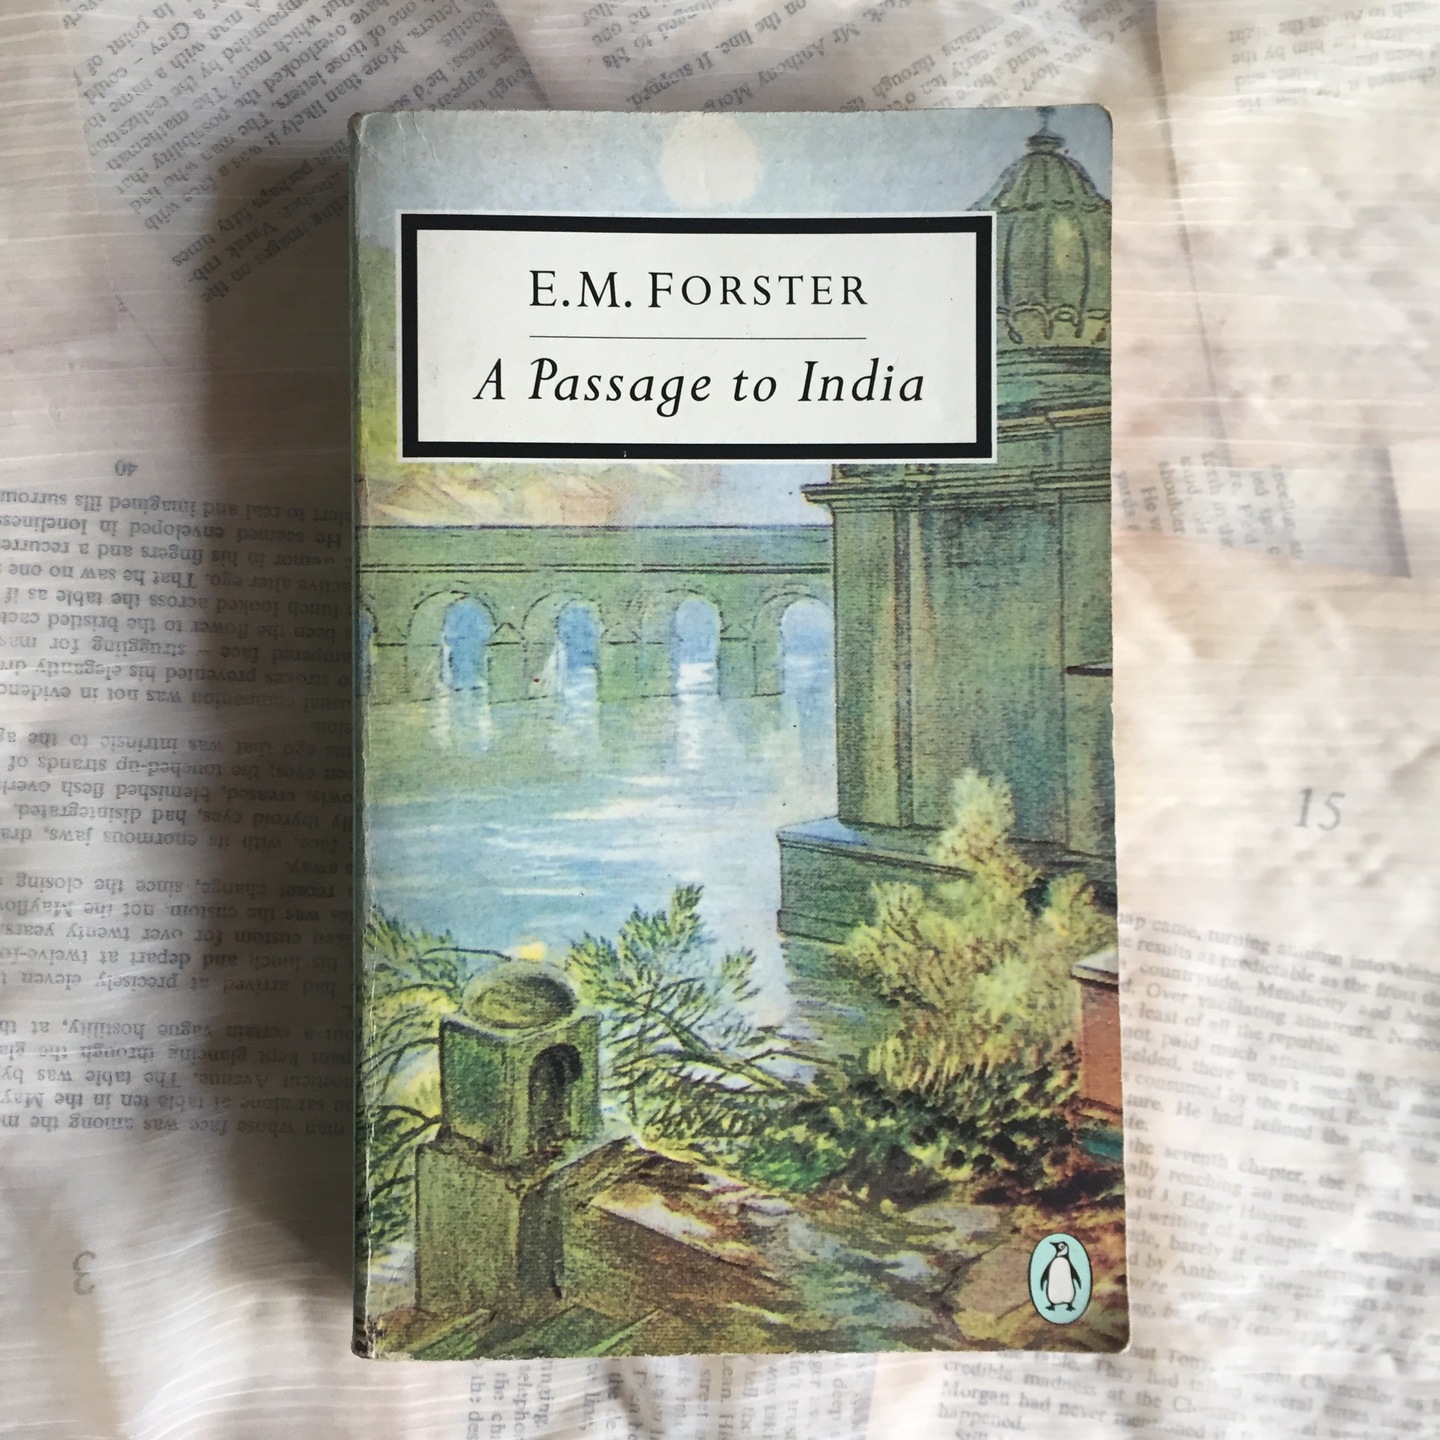 A Passage to India by E.M. Forster [Paperback]